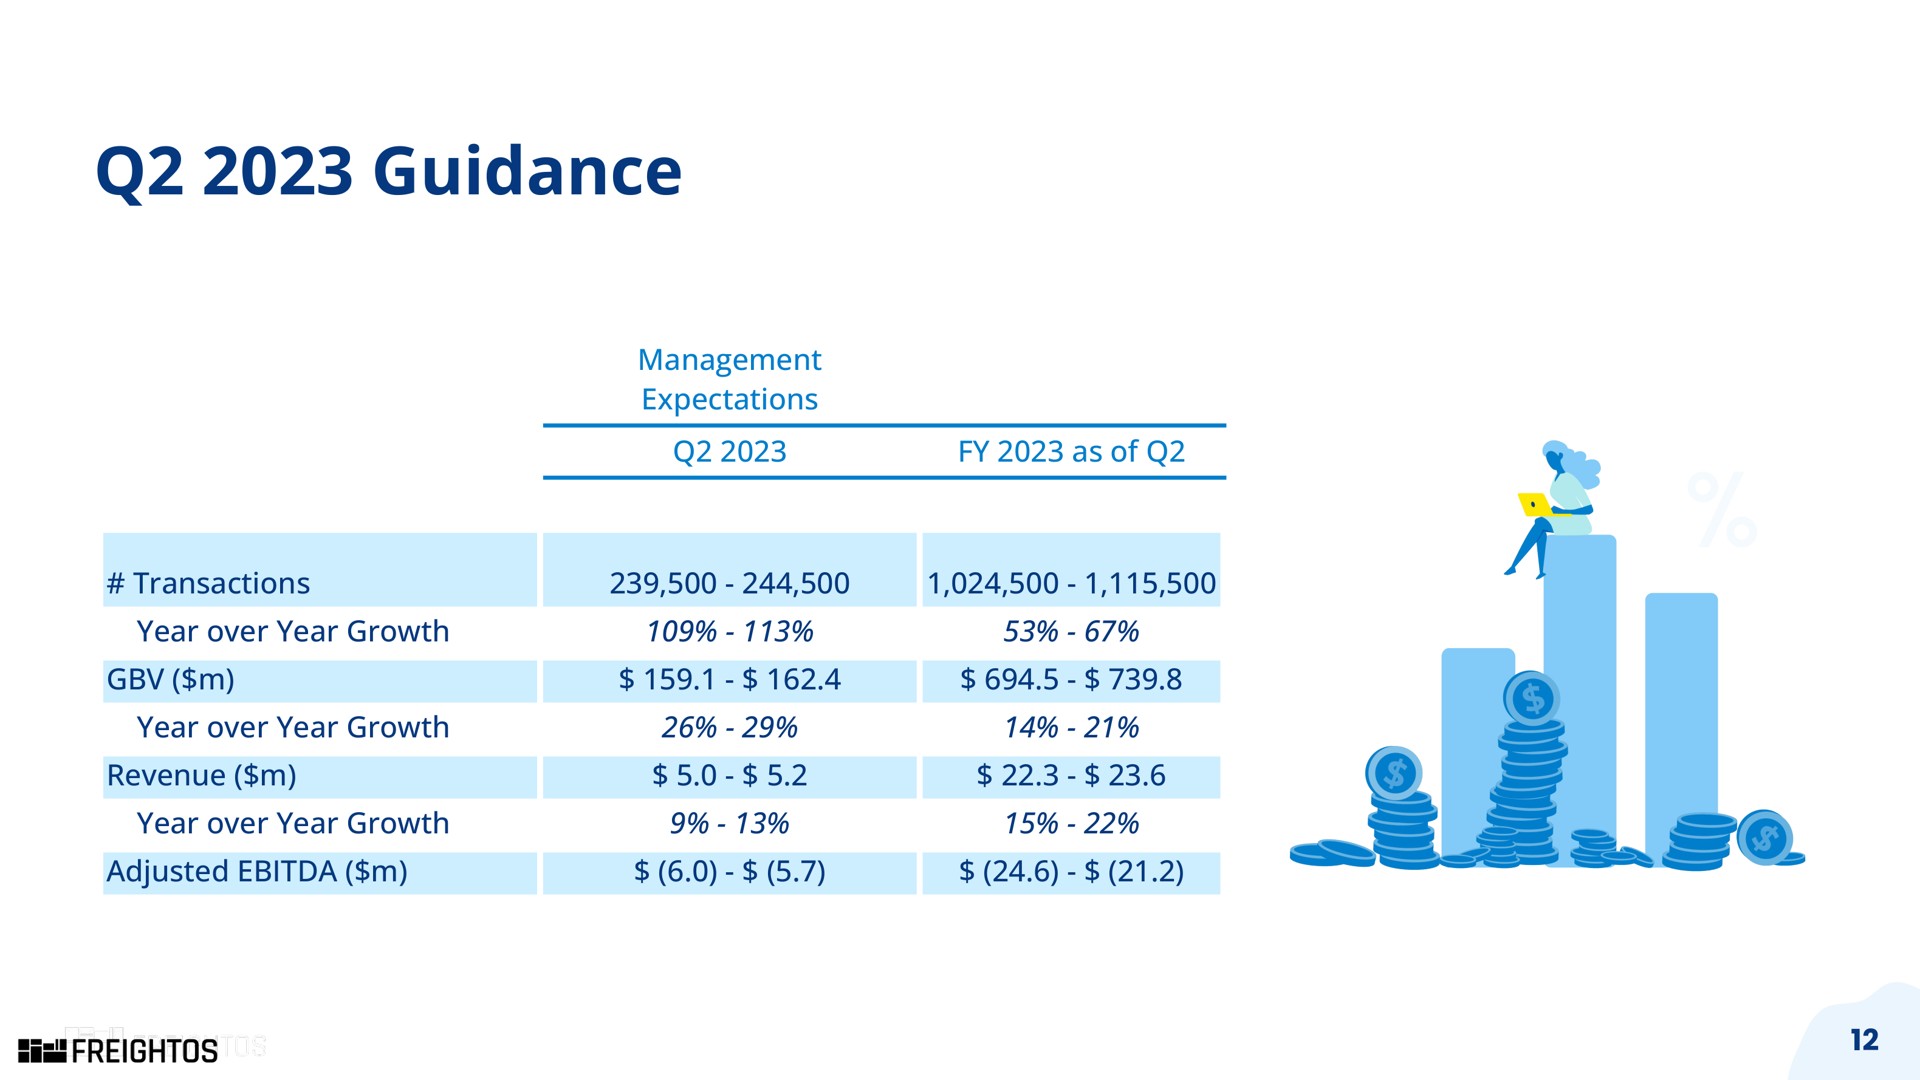 guidance management expectations as of transactions year over year growth year over year growth revenue year over year growth adjusted time | Freightos